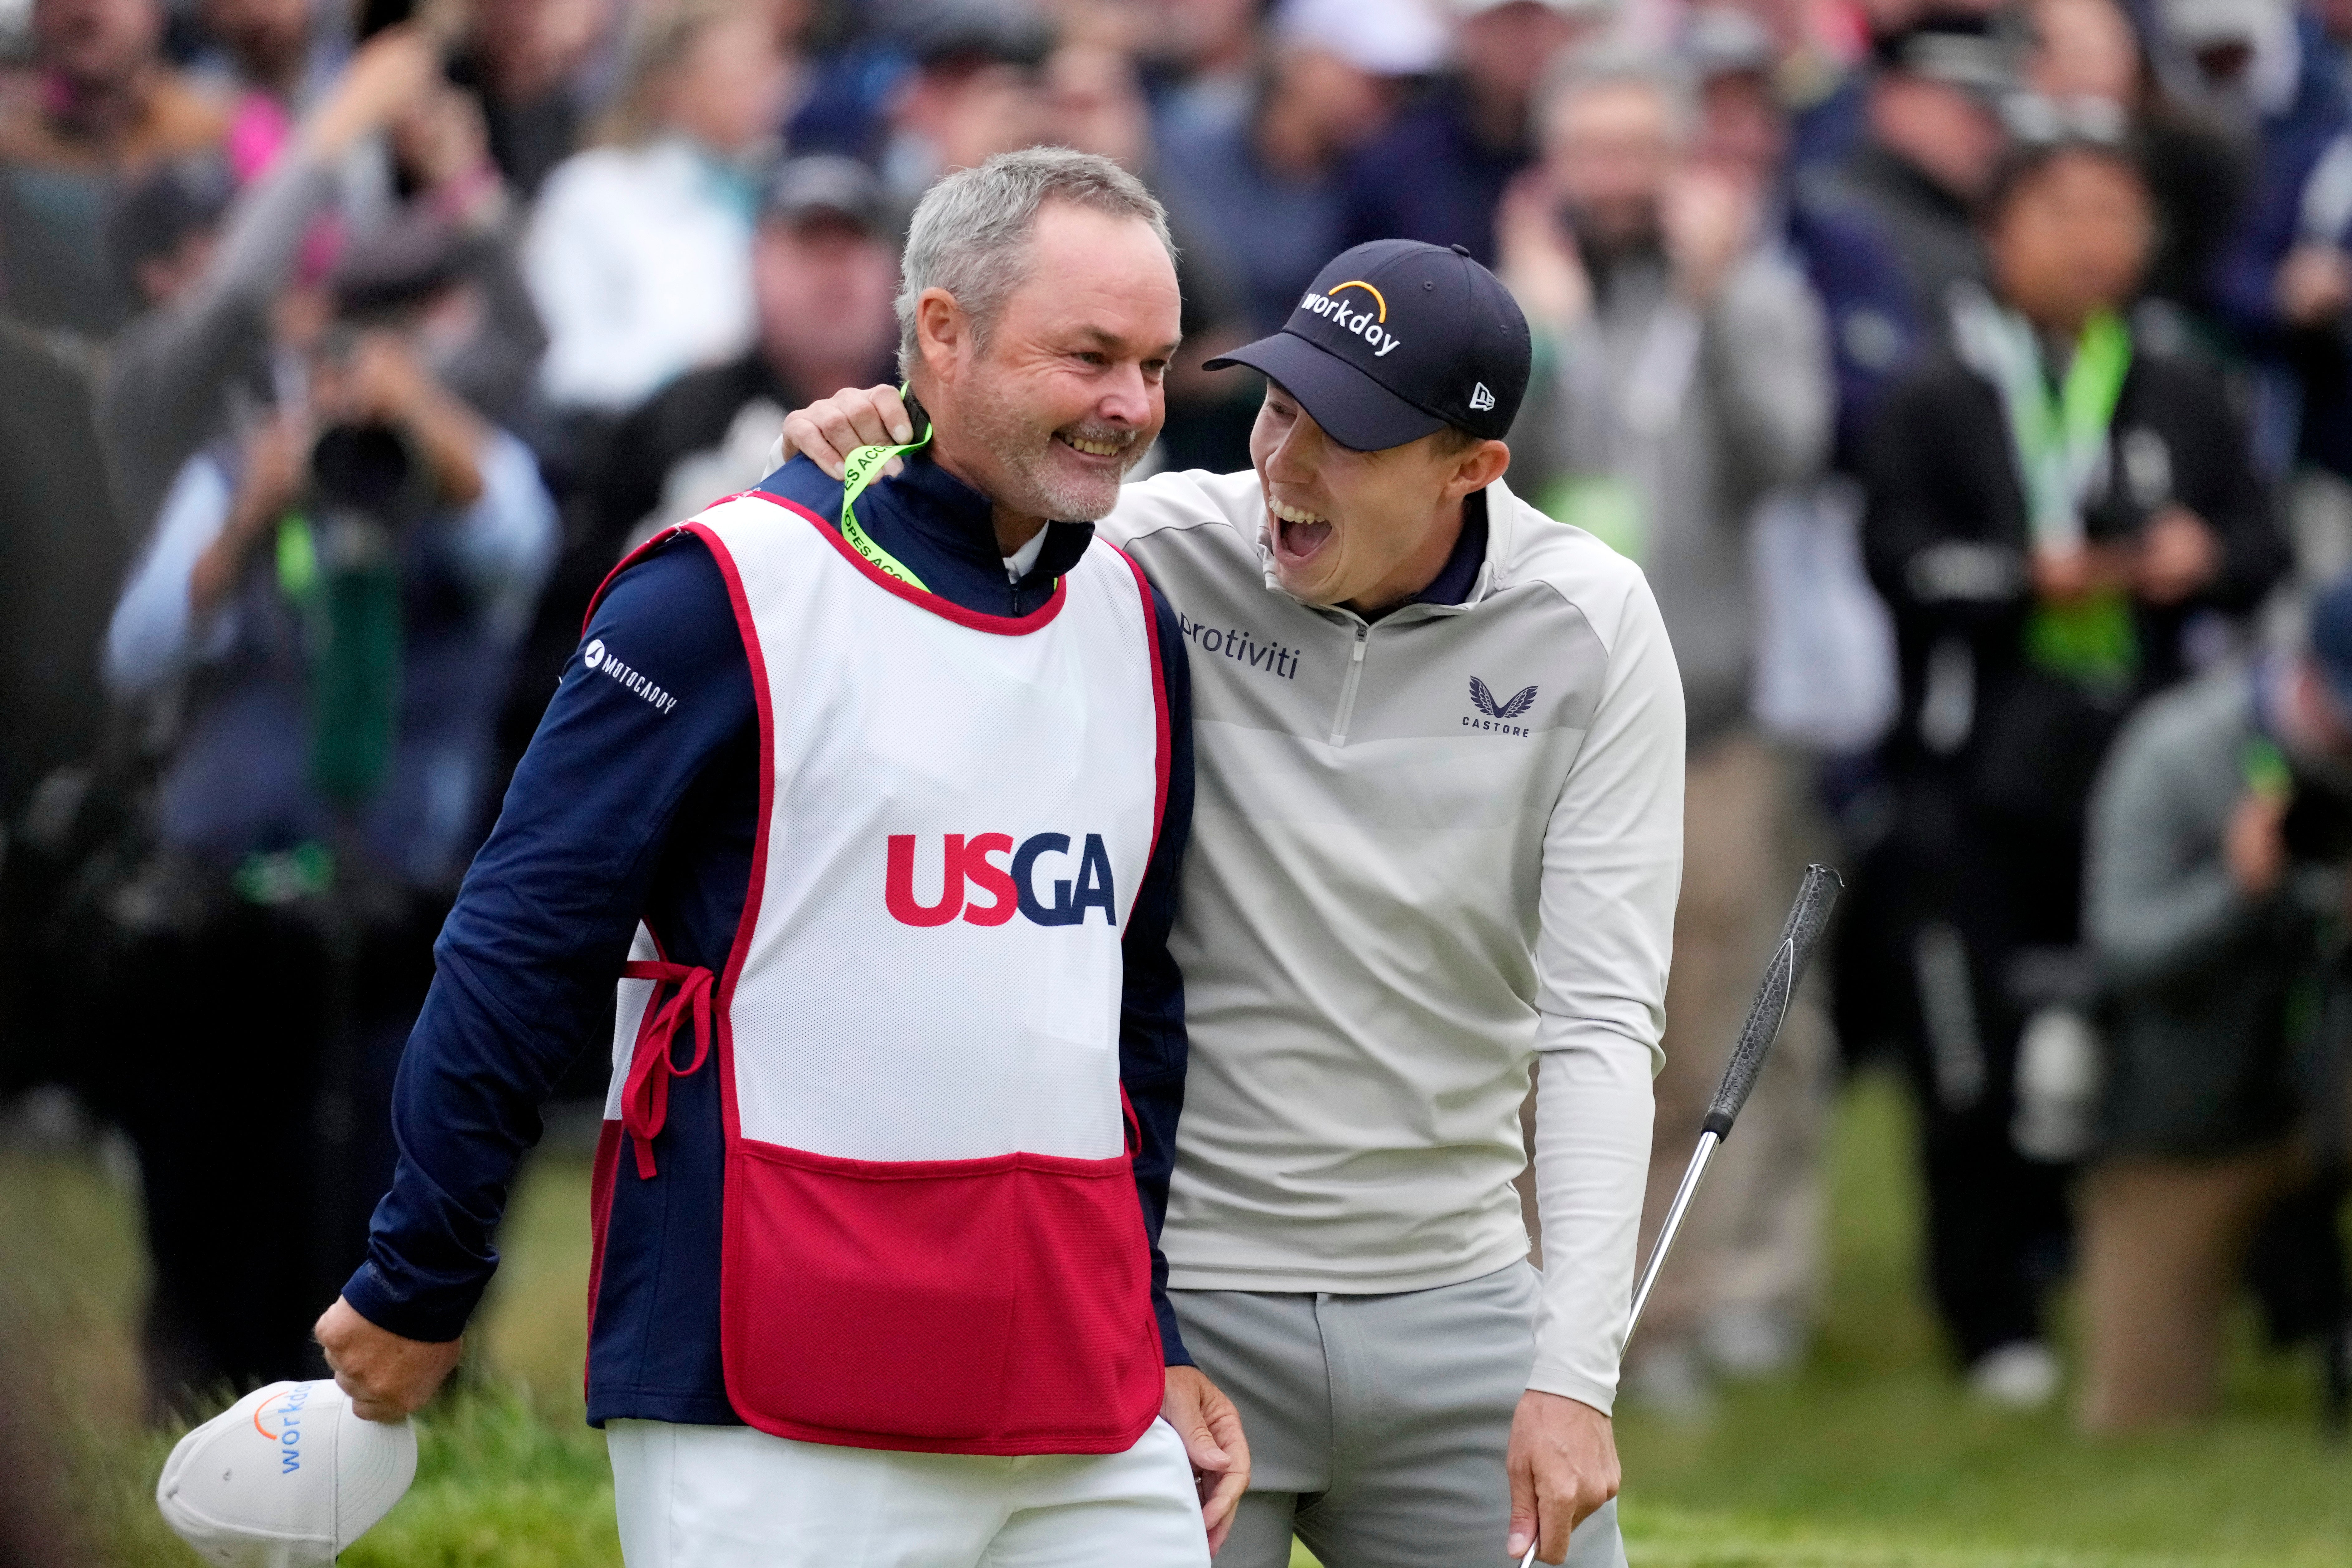 Matt Fitzpatrick celebrates with his caddie Billy Foster after winning the US Open at Brookline (Charlie Riedel/AP)